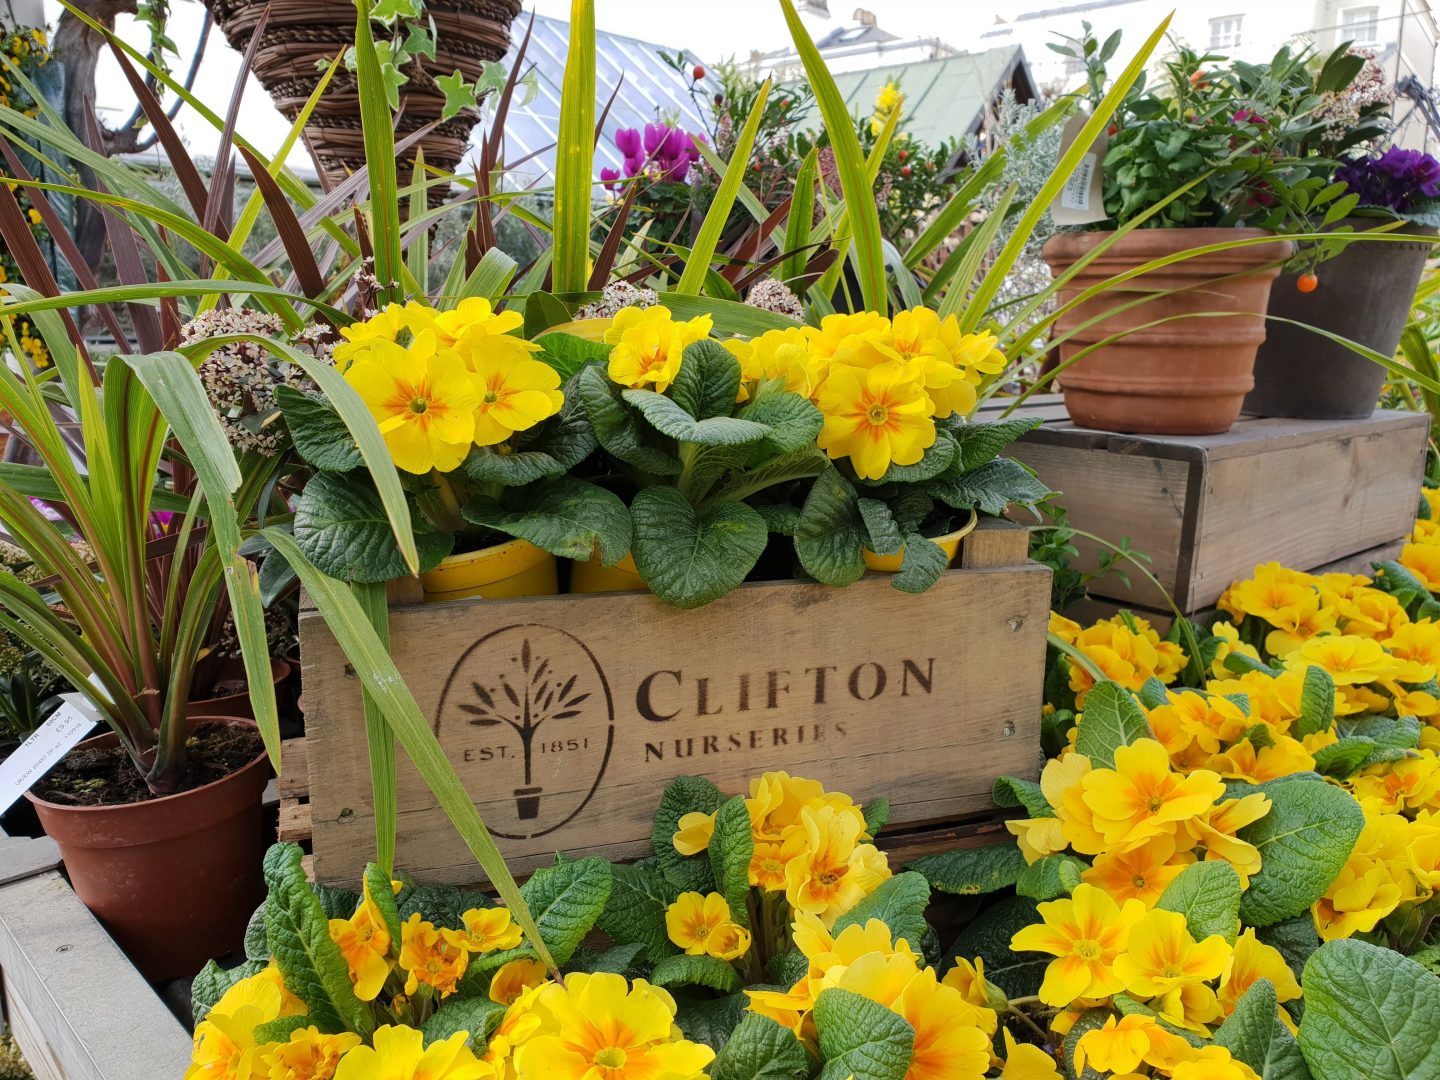 Yellow Flowers at Clifton Nurseries in Maida Vale, London